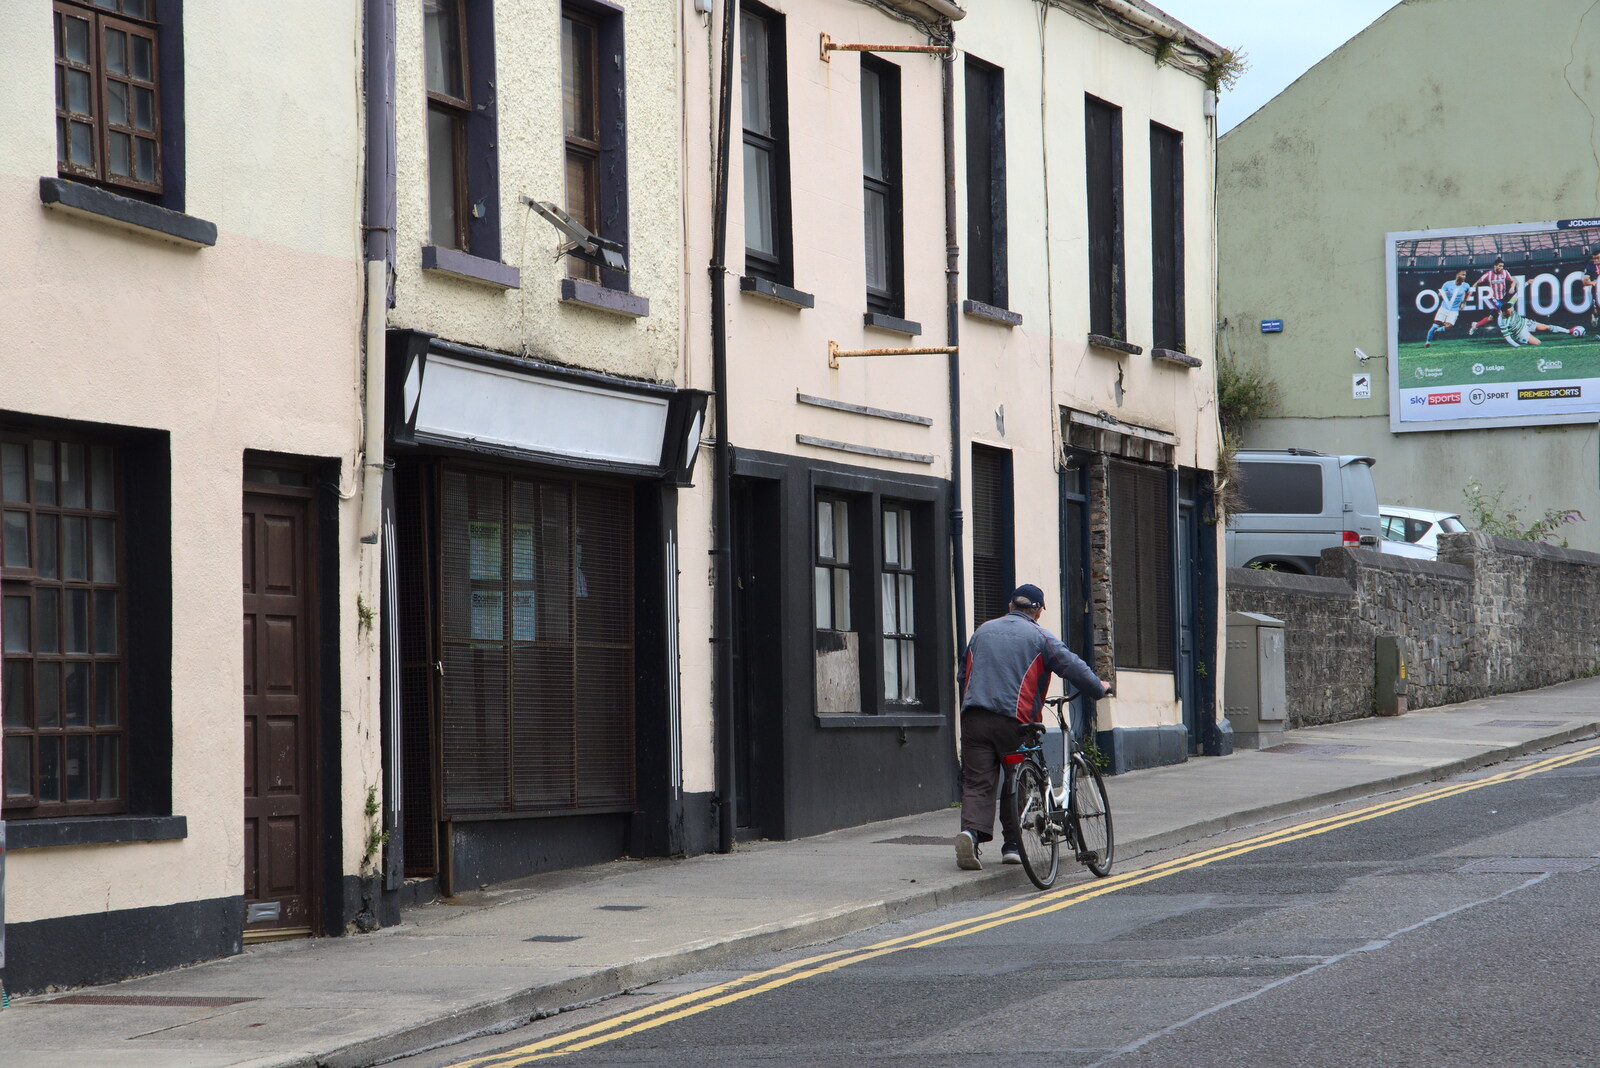 A Trip to Manorhamilton, County Leitrim, Ireland - 11th August 2021: Some dude pushes a bike up The Mall